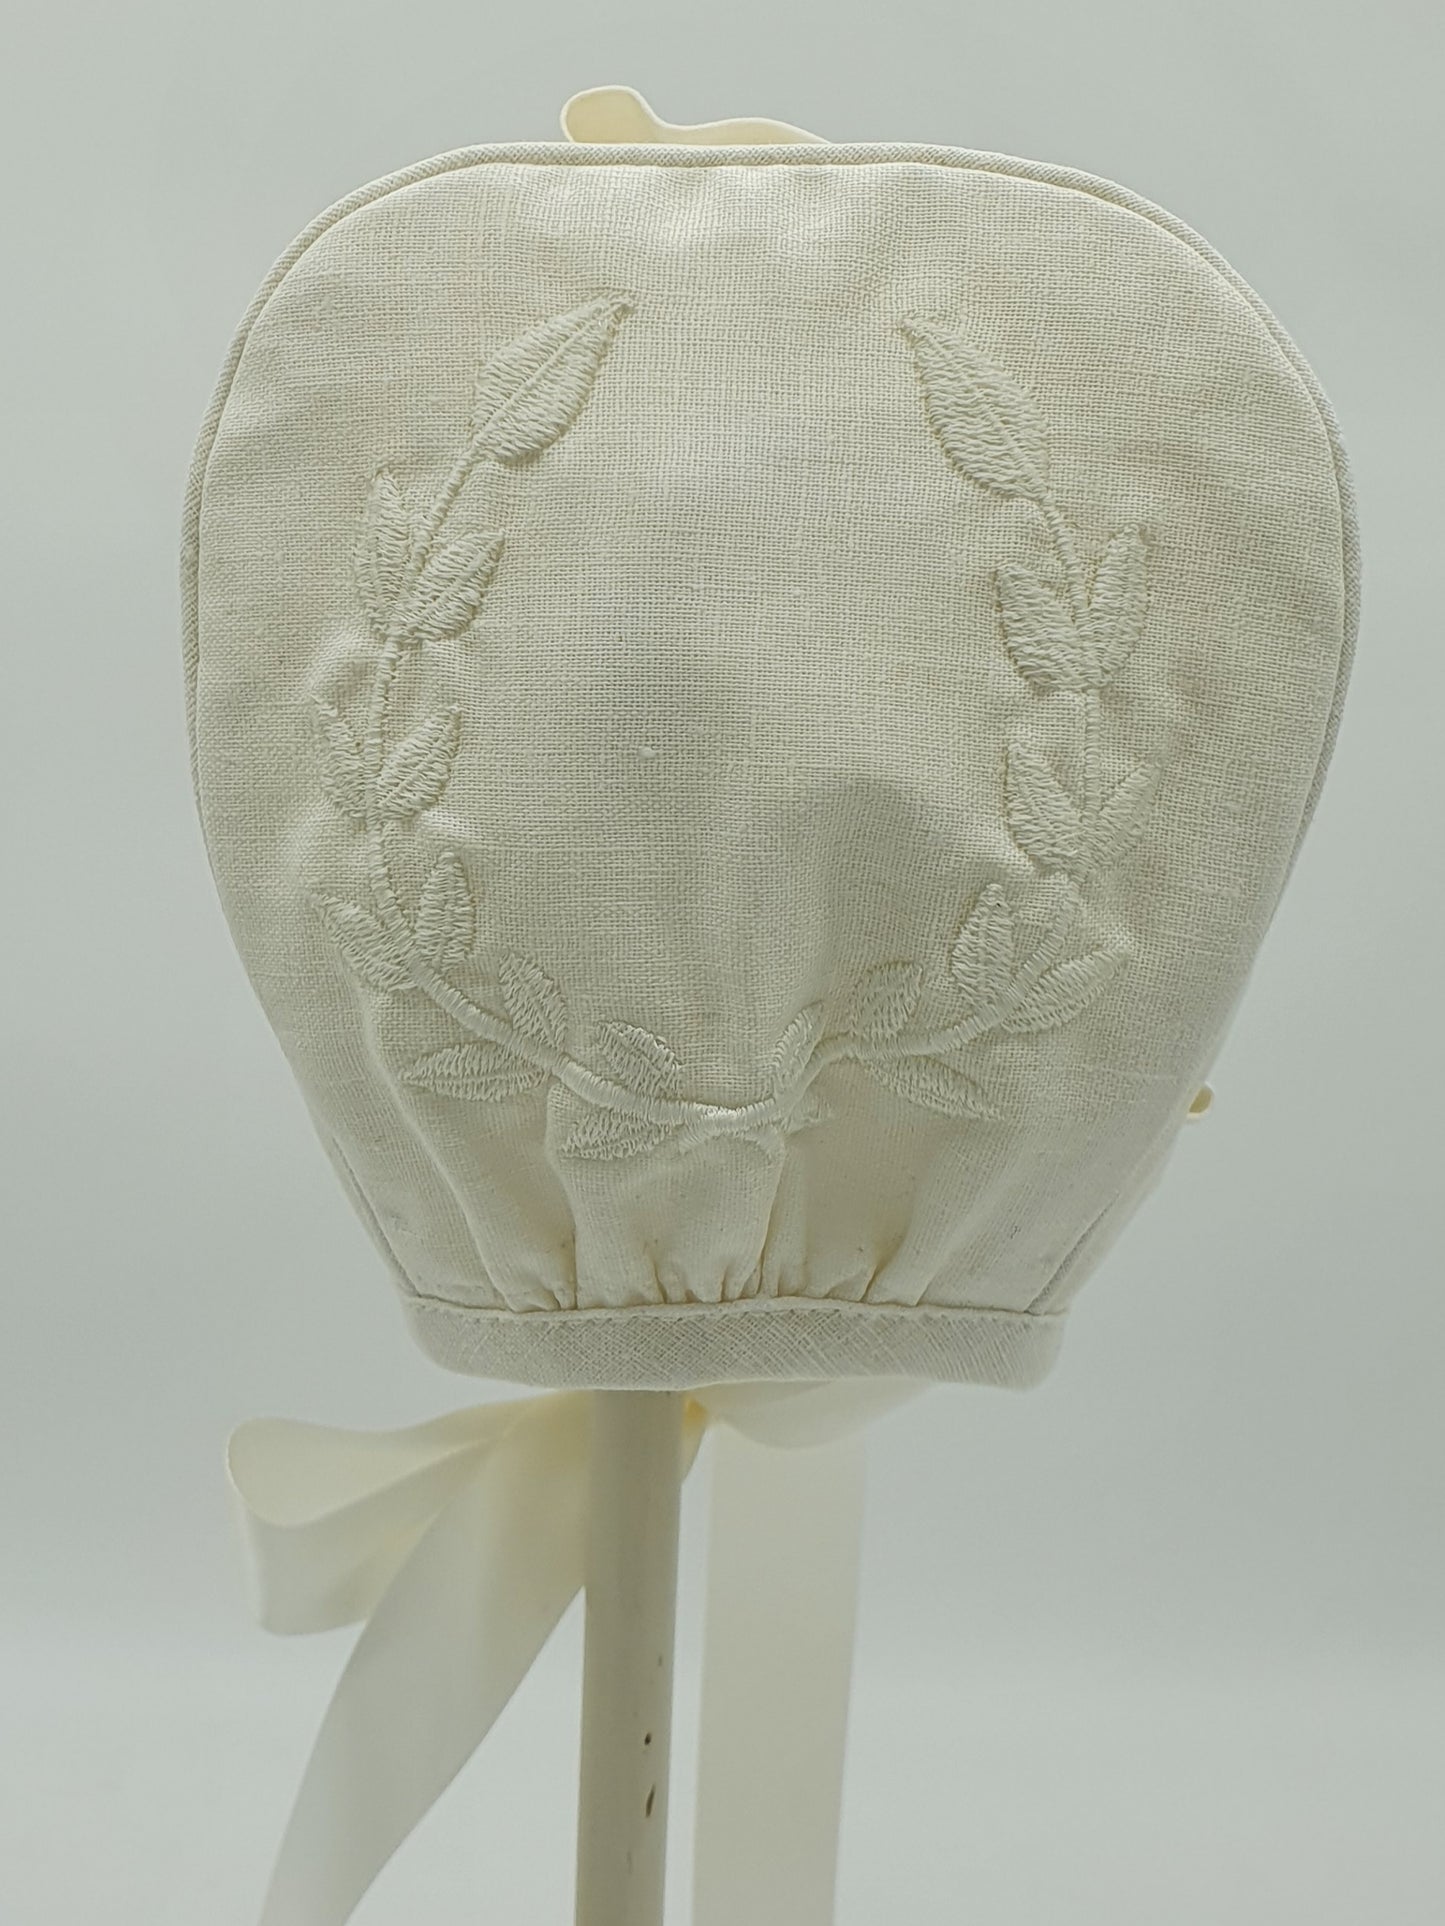 Exclusive Bonnet, Cream Linen with Embroidered Cream Wreath